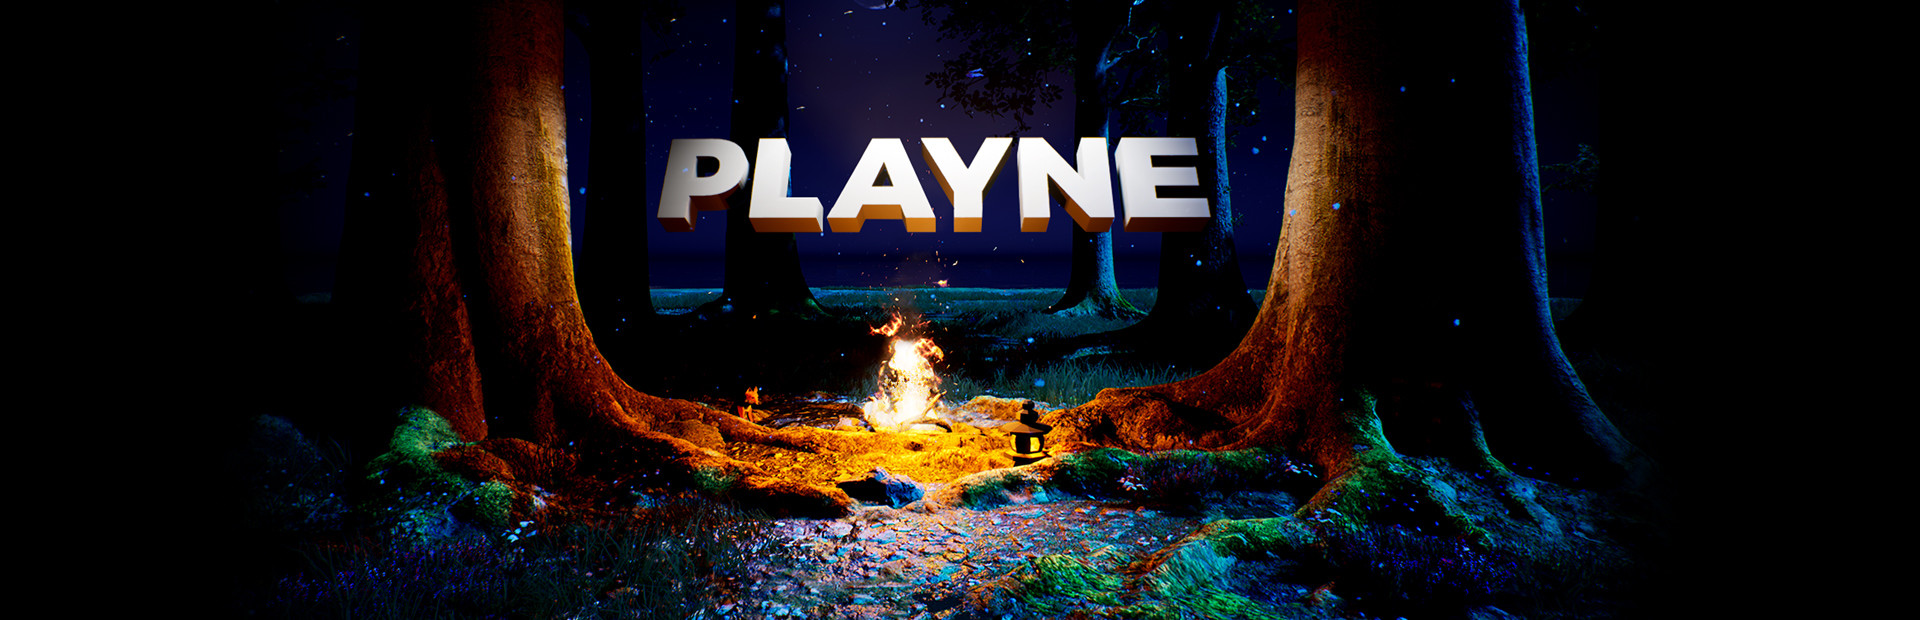 PLAYNE : The Meditation Game cover image